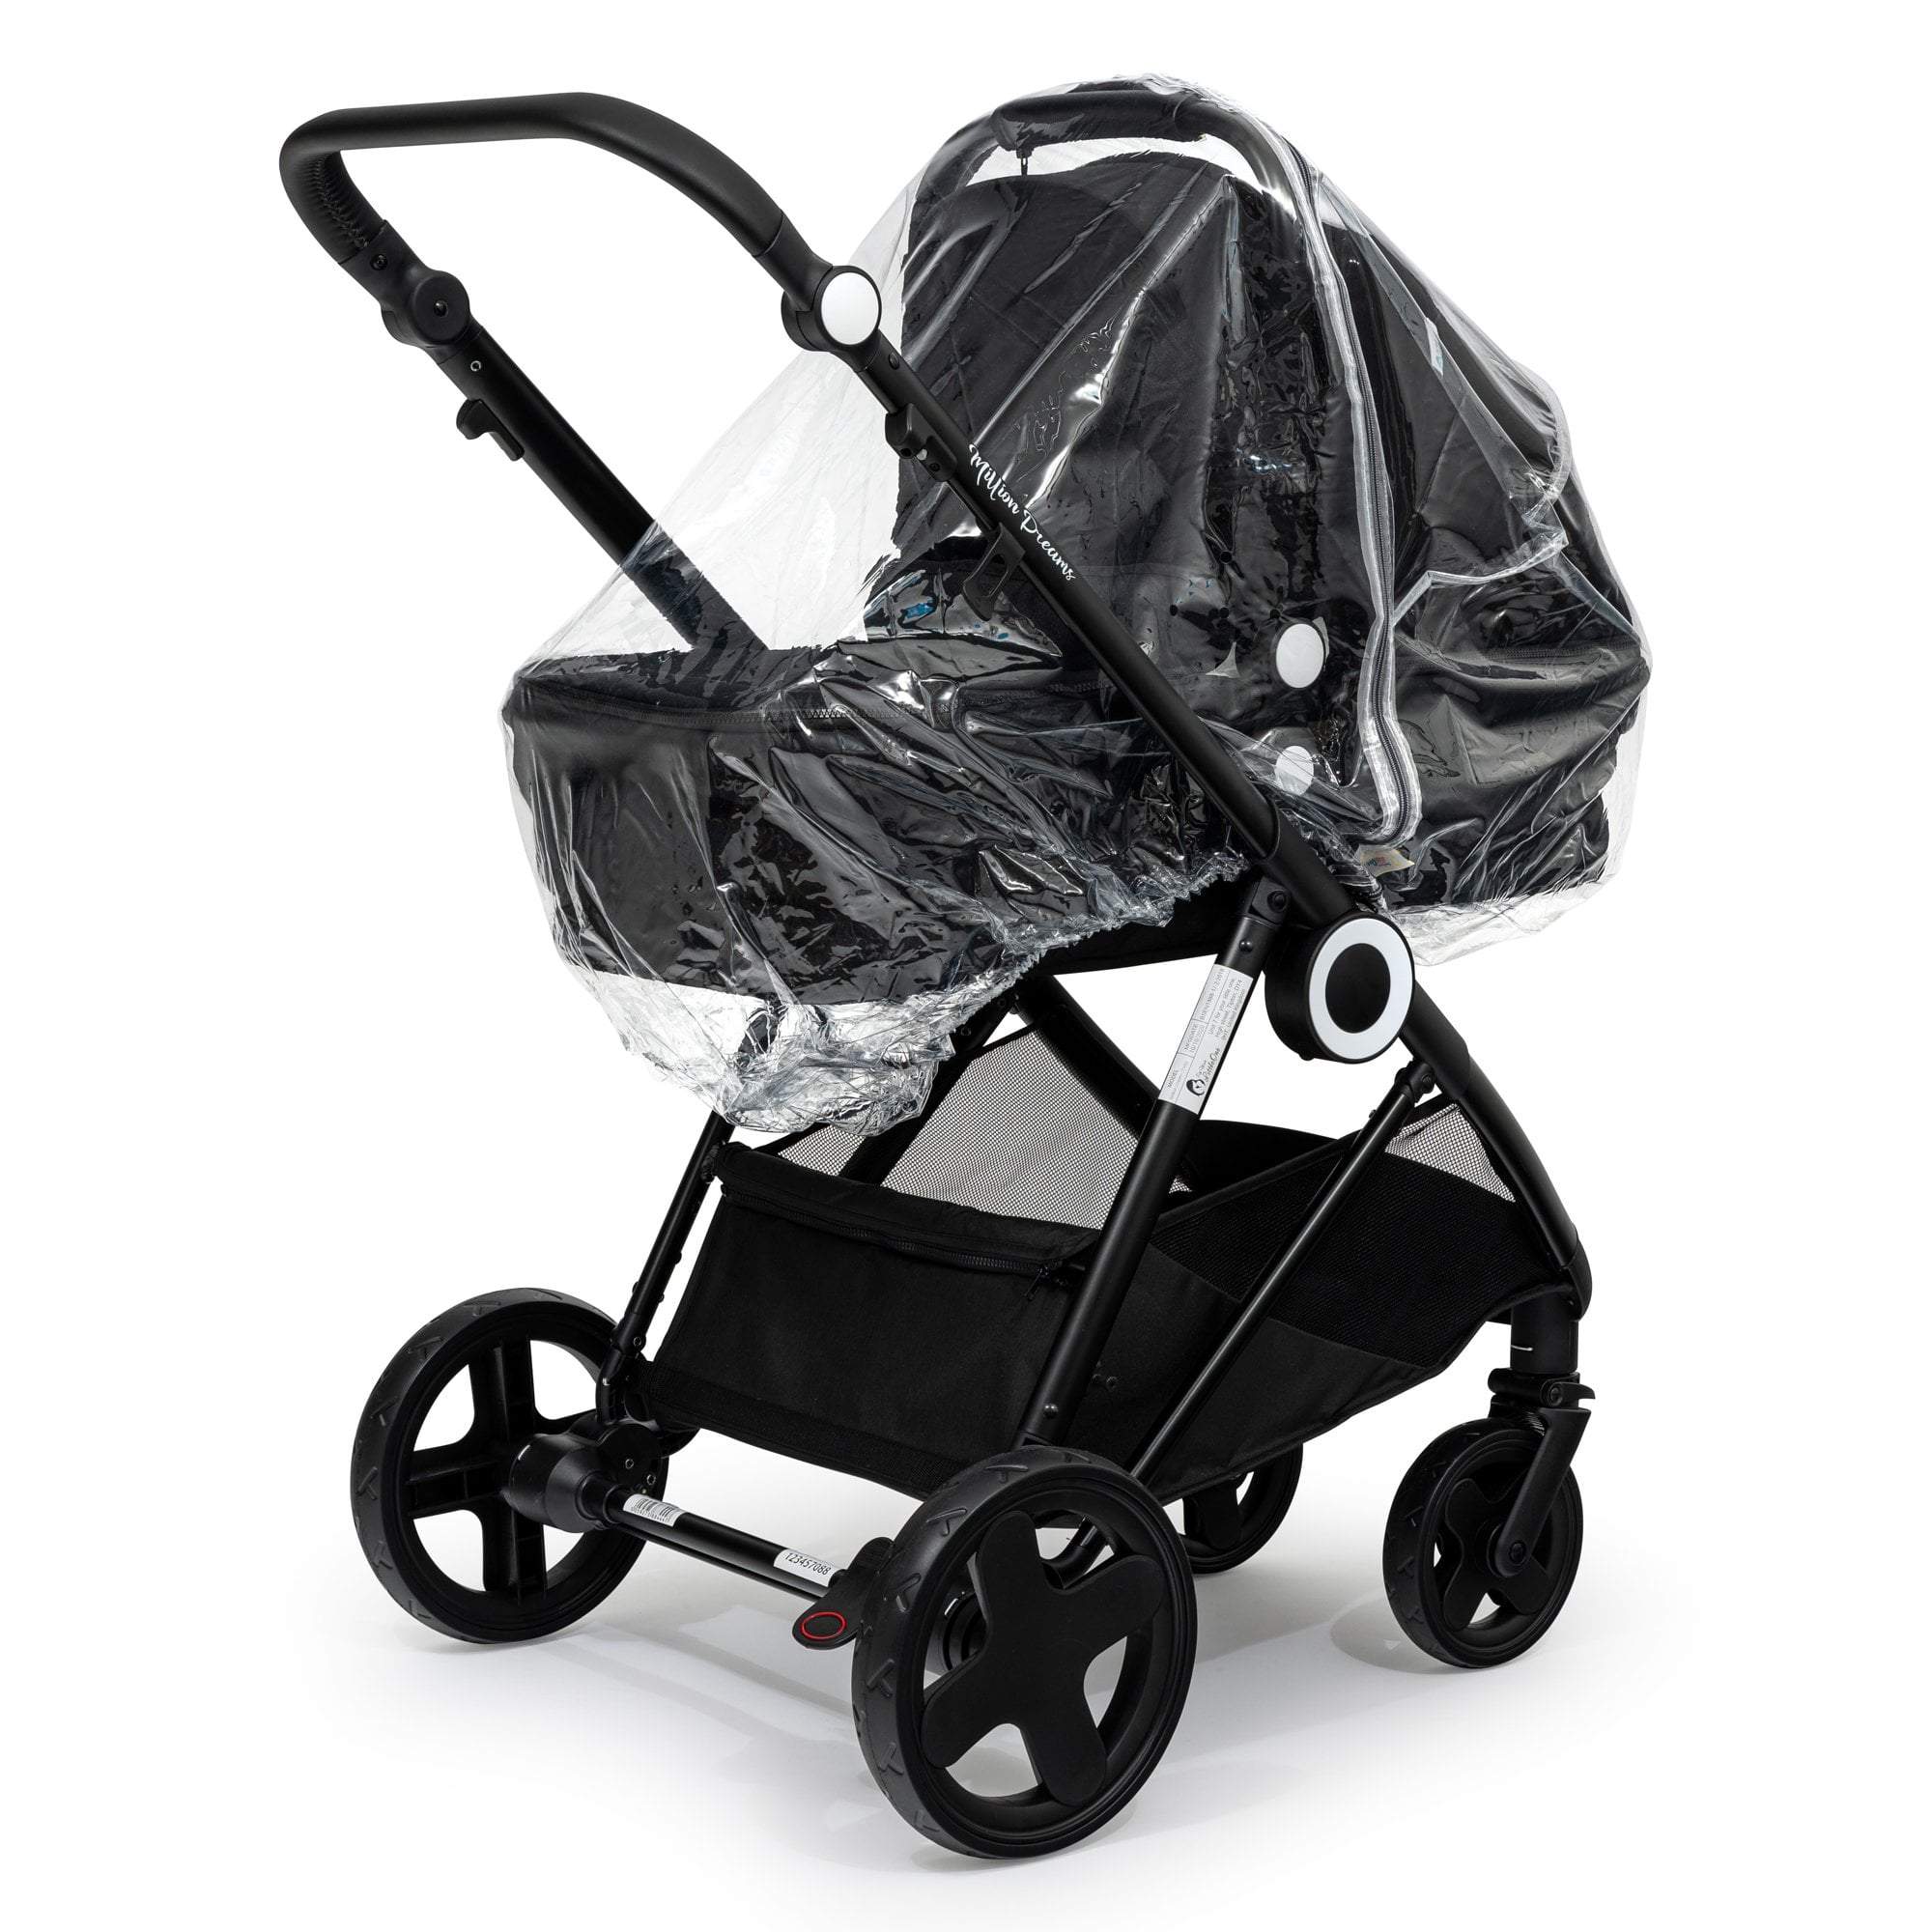 Carrycot Raincover Compatible With Silver Cross - Fits All Models - For Your Little One